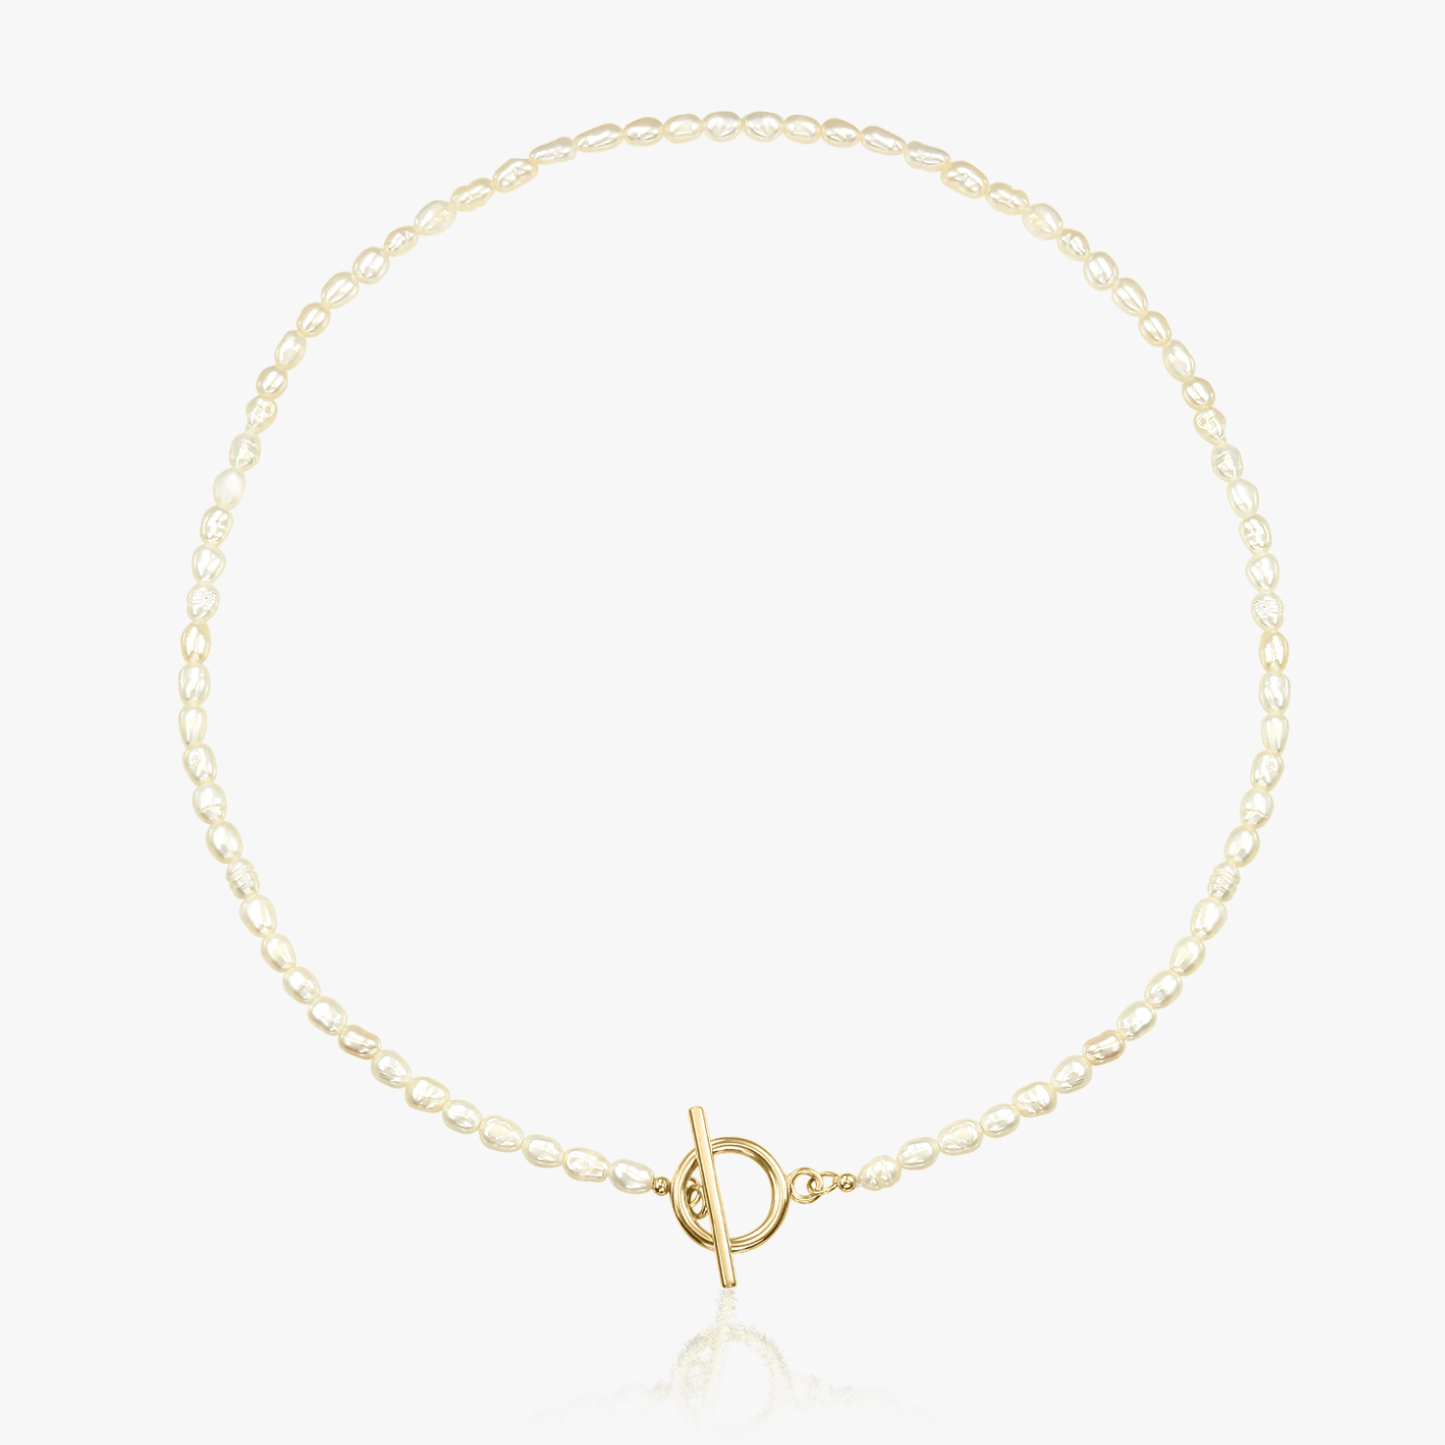 Locked gold necklace - Natural pearls